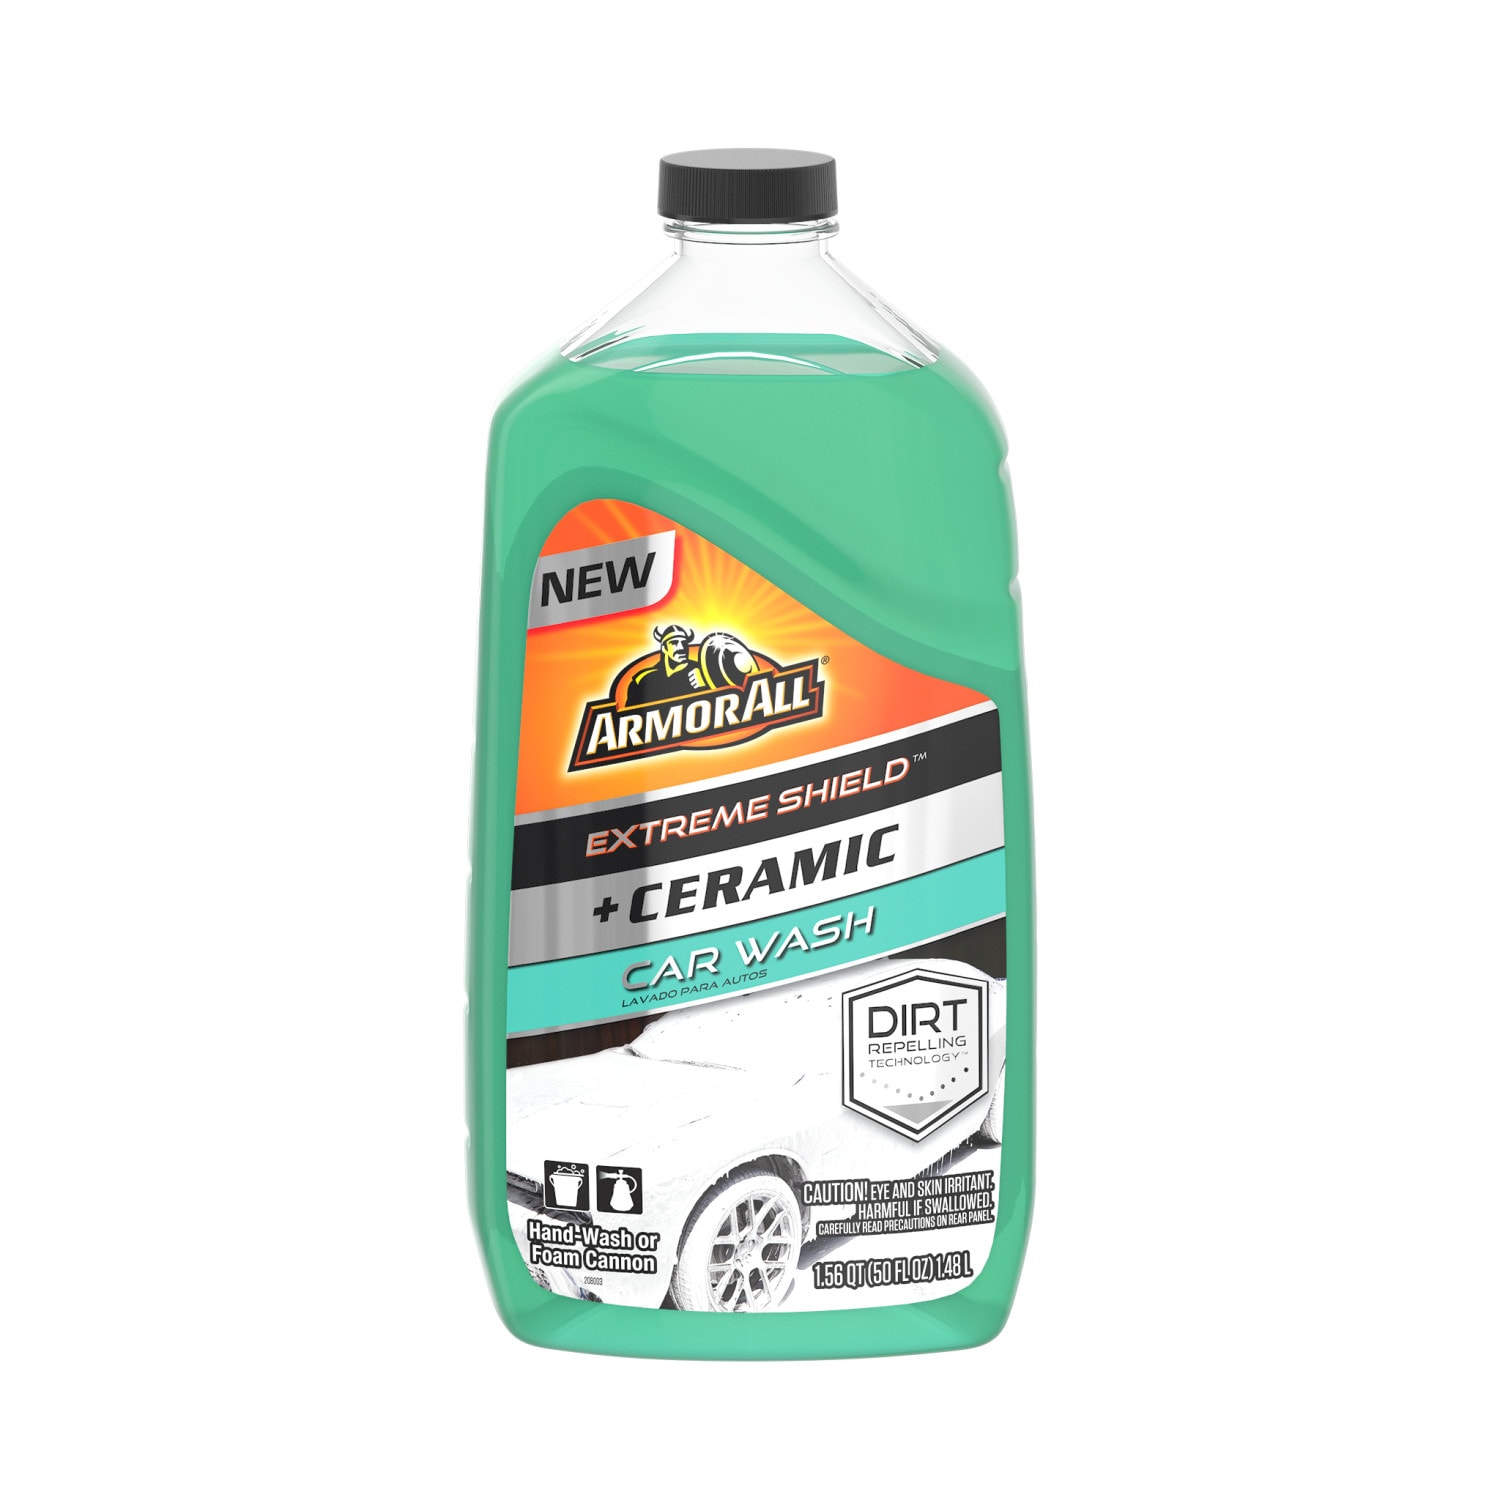 Armor All Ceramic Foaming Car Wash Soap with Extreme Shield, 1 Gallon, 128  Fl Oz (Pack of 1)